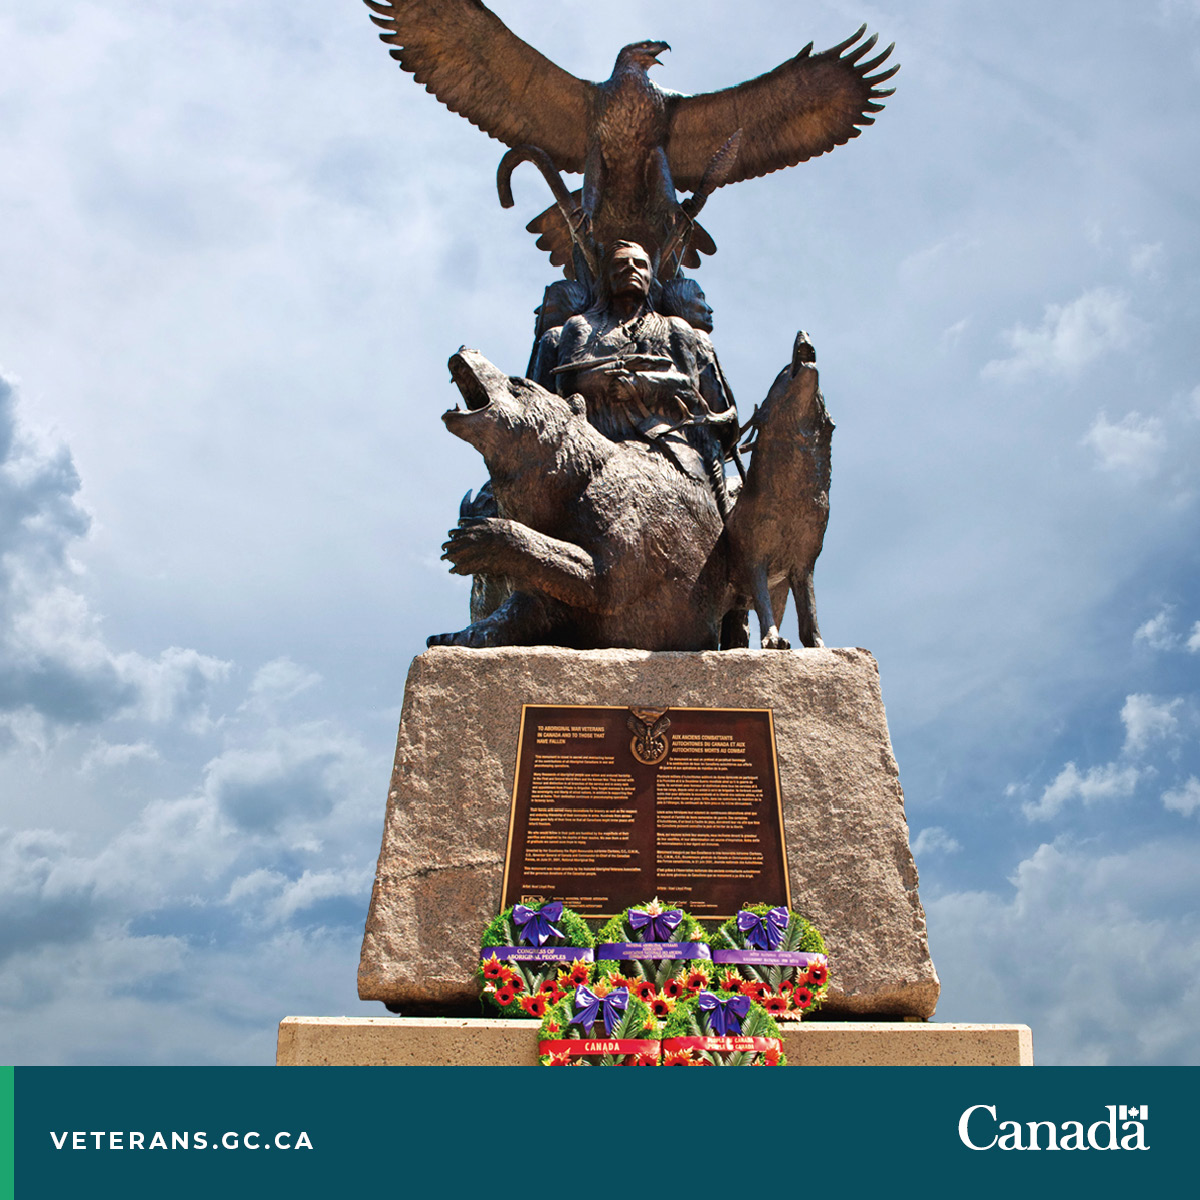 Today is National Indigenous Veterans Day. The Assembly of First Nations is an advocacy org representing 630 First Nations communities across Canada. AFN has been supported by the Veteran and Family Well-Being Fund to improve services for Indigenous Veterans & their families(1/2)